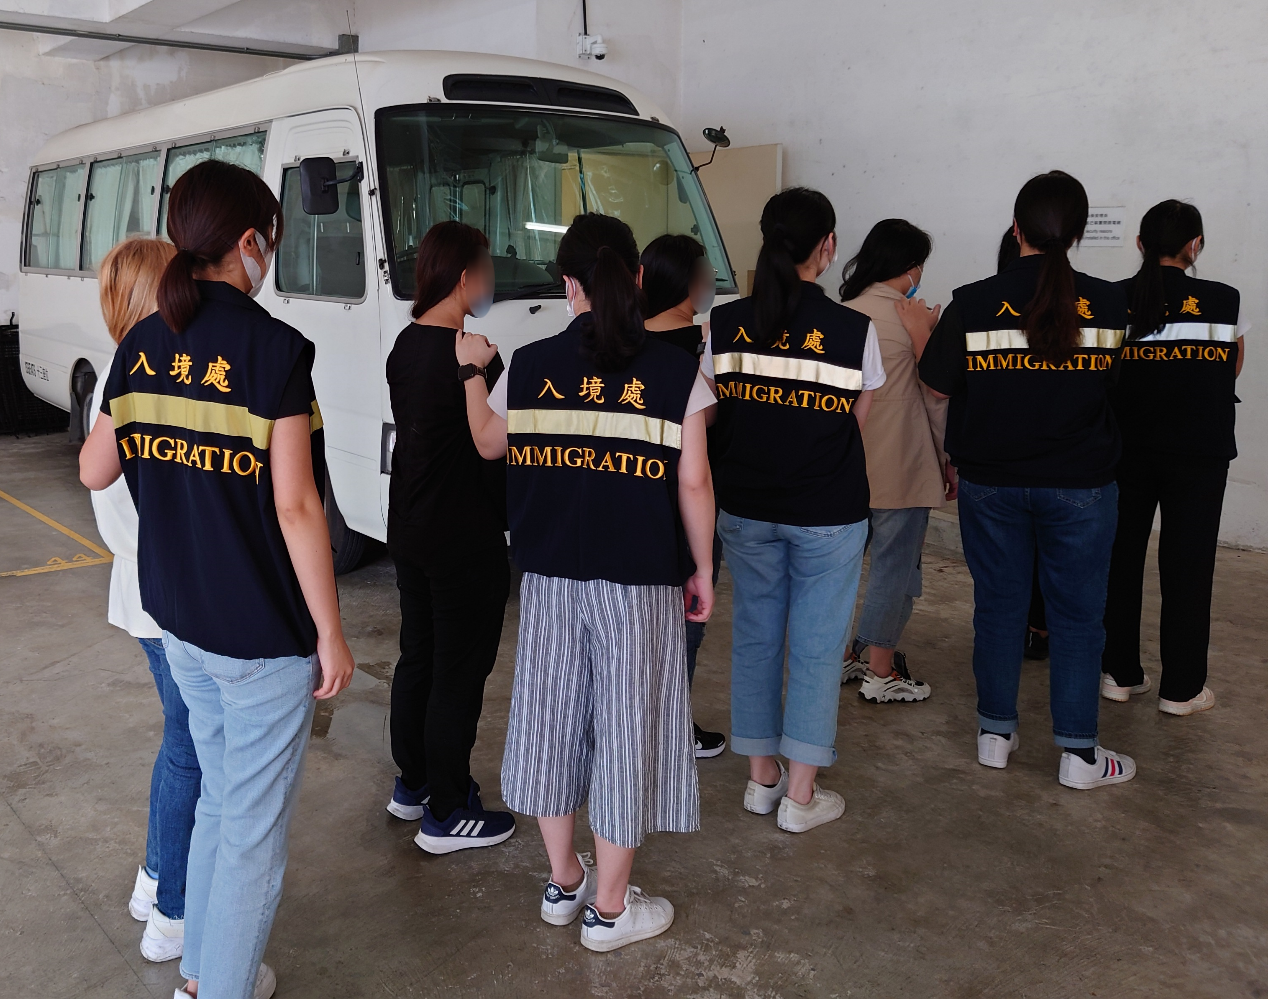 The Immigration Department mounted a series of territory-wide anti-illegal worker operations, including operations codenamed "Twilight" and joint operations with the Hong Kong Police Force codenamed "Champion", for three consecutive days from April 11 to yesterday (April 13). Photo shows suspected illegal workers arrested during the operations.